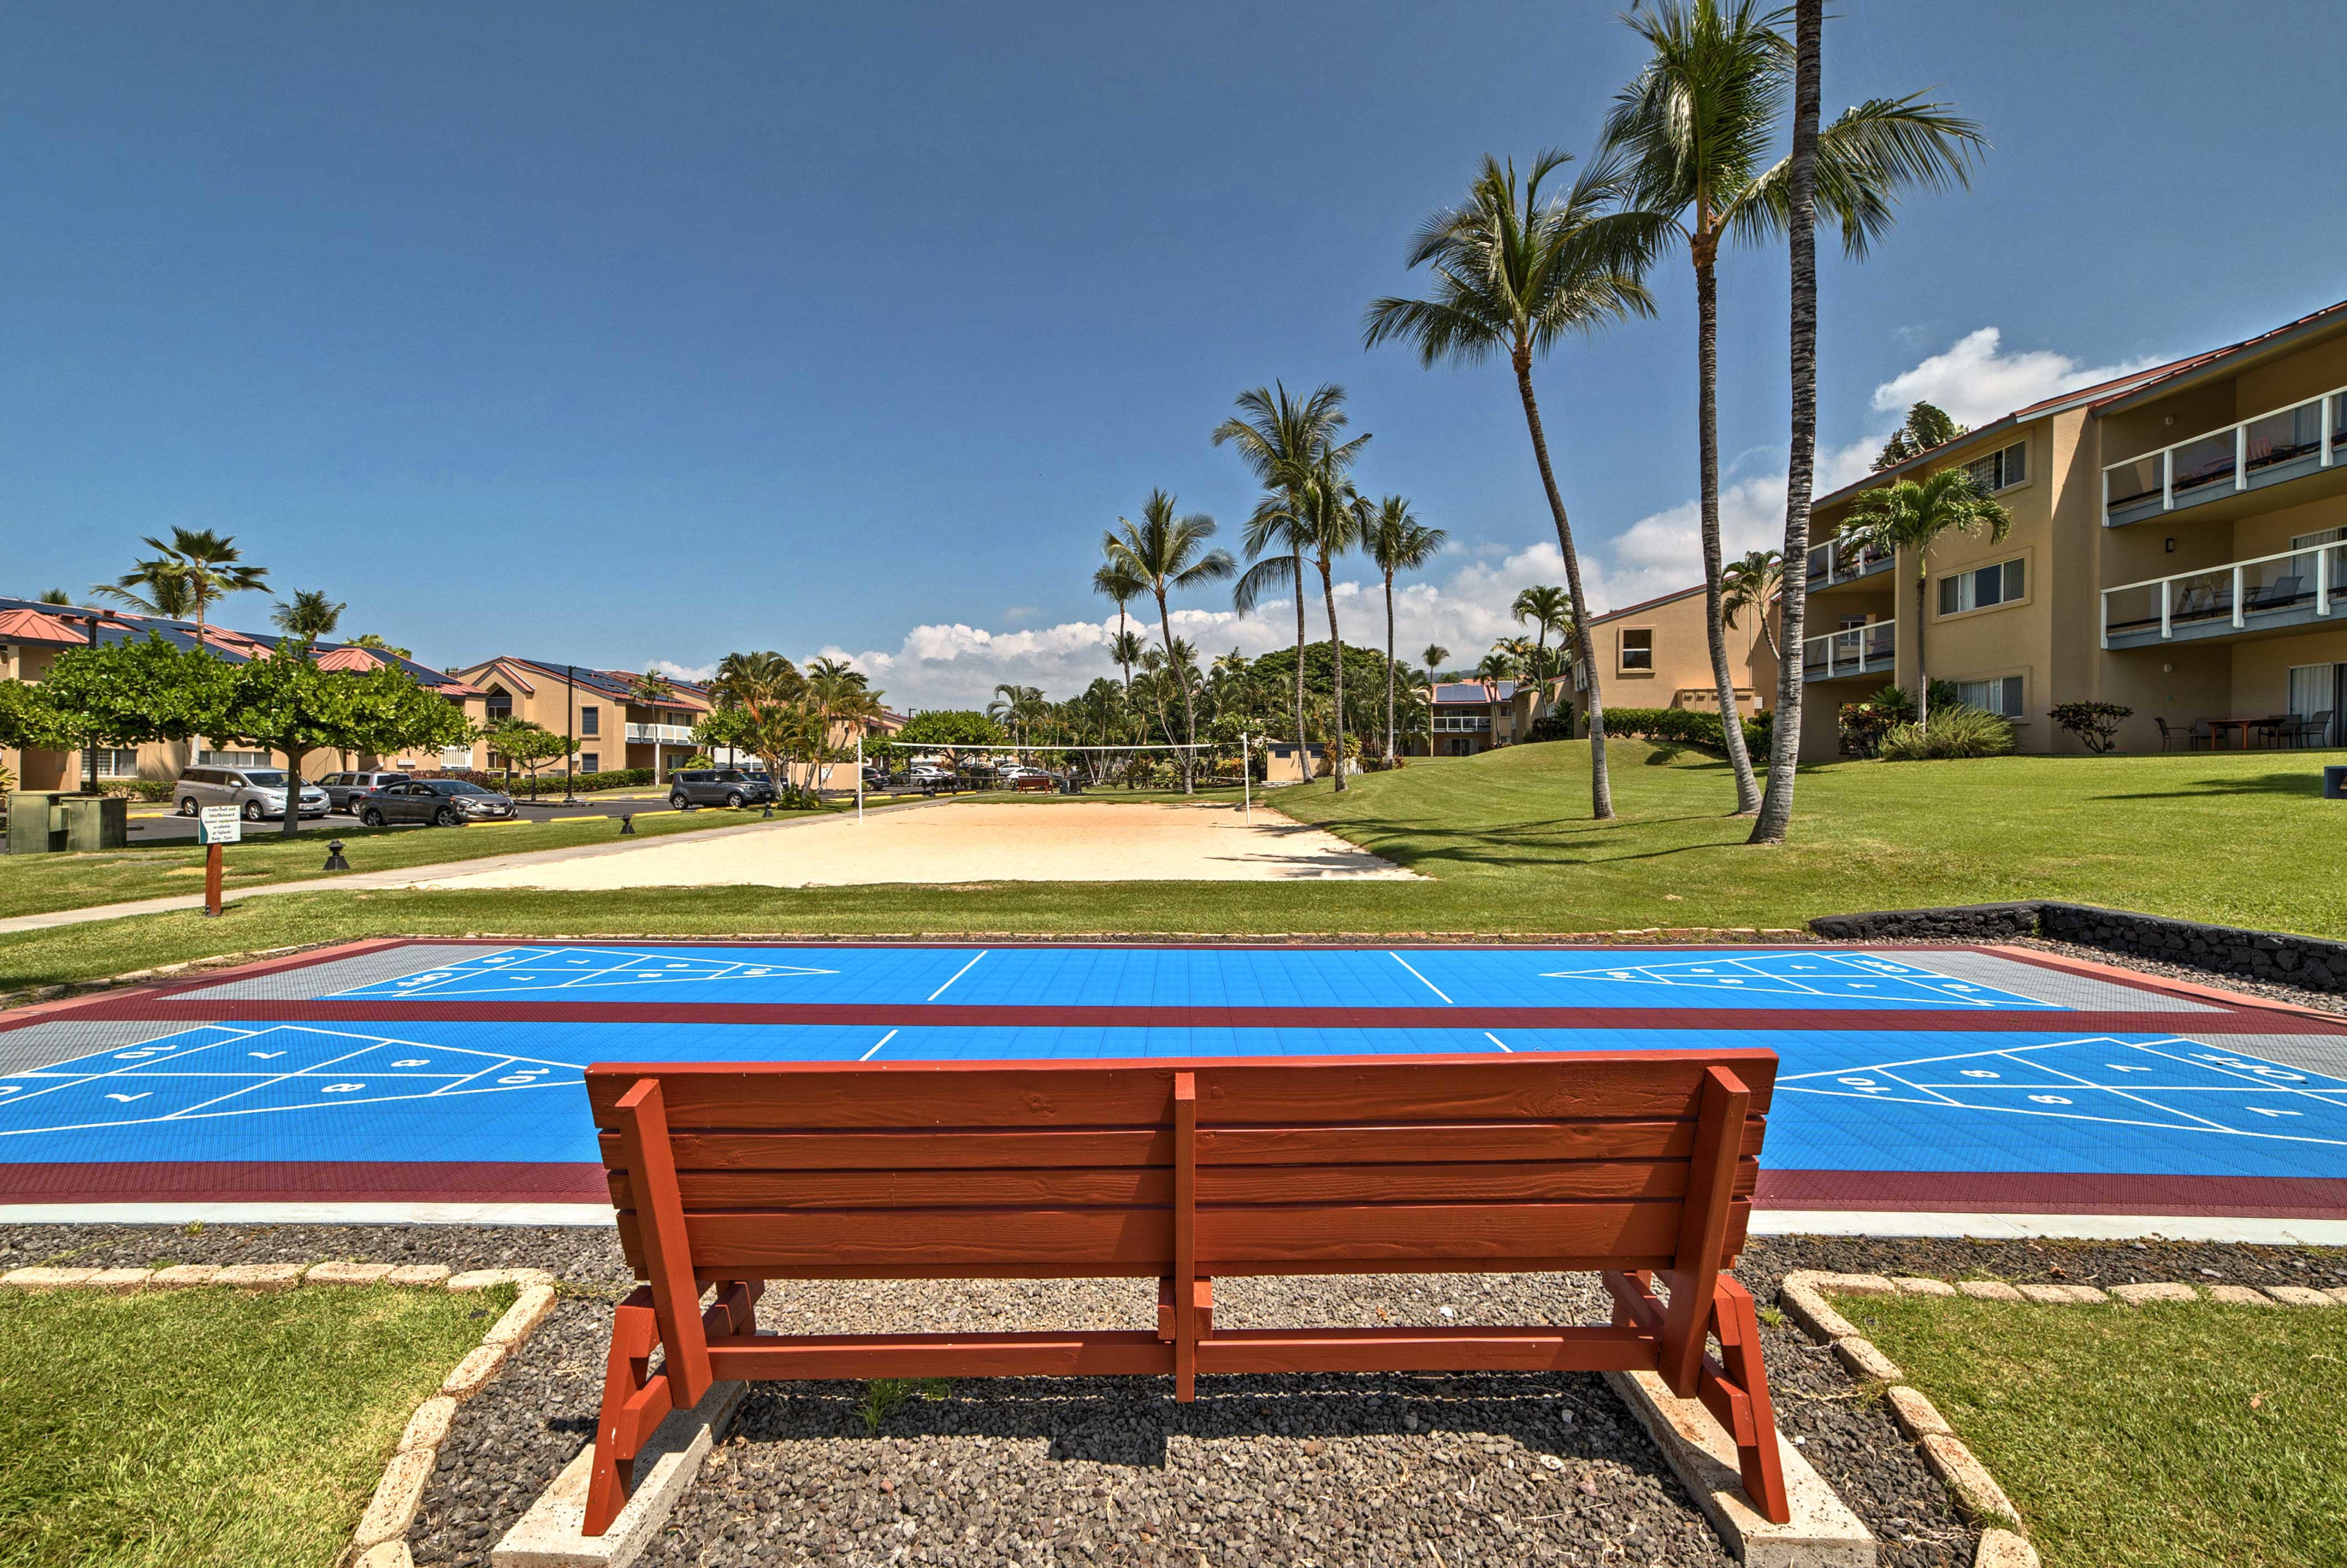 The property also includes shuffleboard courts, a beach volleyball court, and a picnic area with gas grills.